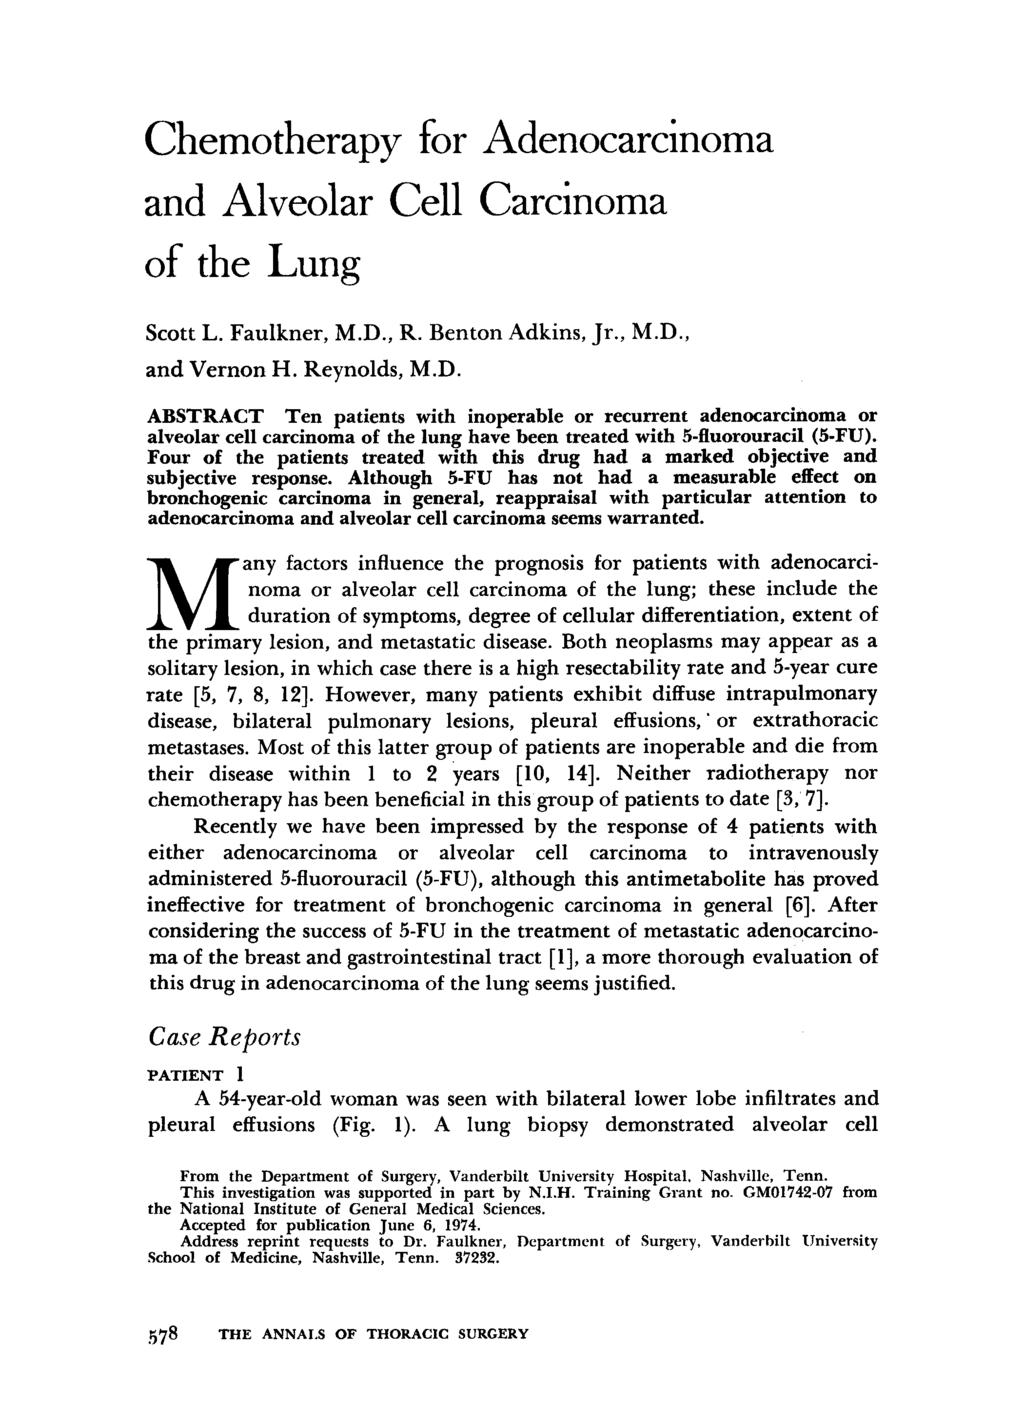 Chemotherapy for Adenocarcinoma and Alveolar Cell Carcinoma of the Lung Scott L. Faulkner, M.D.